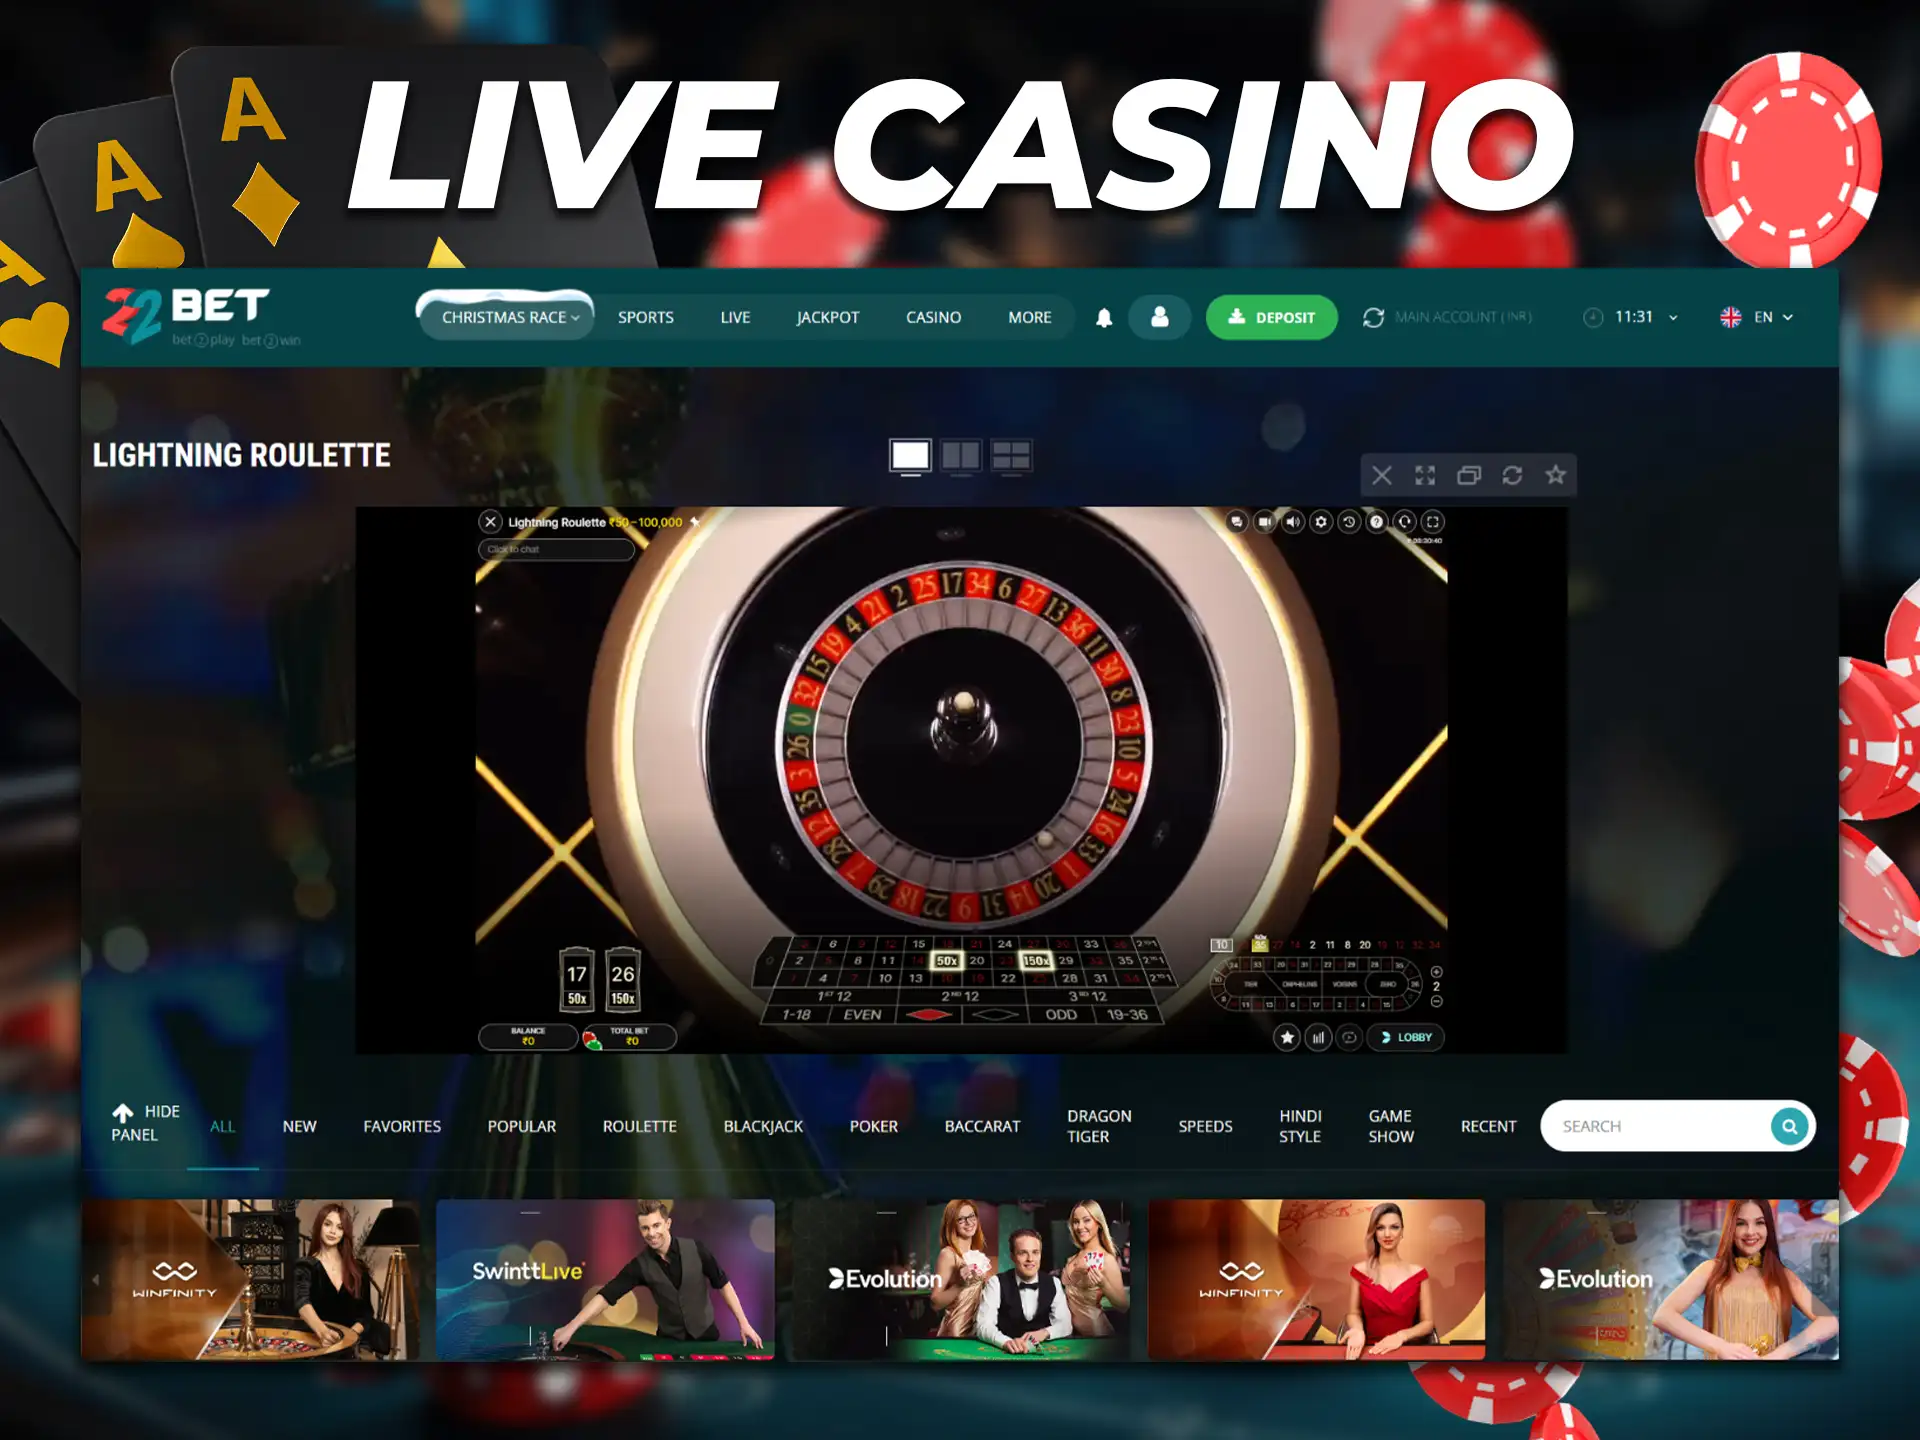 Live casino gives Indian players the opportunity to play with a live dealer.